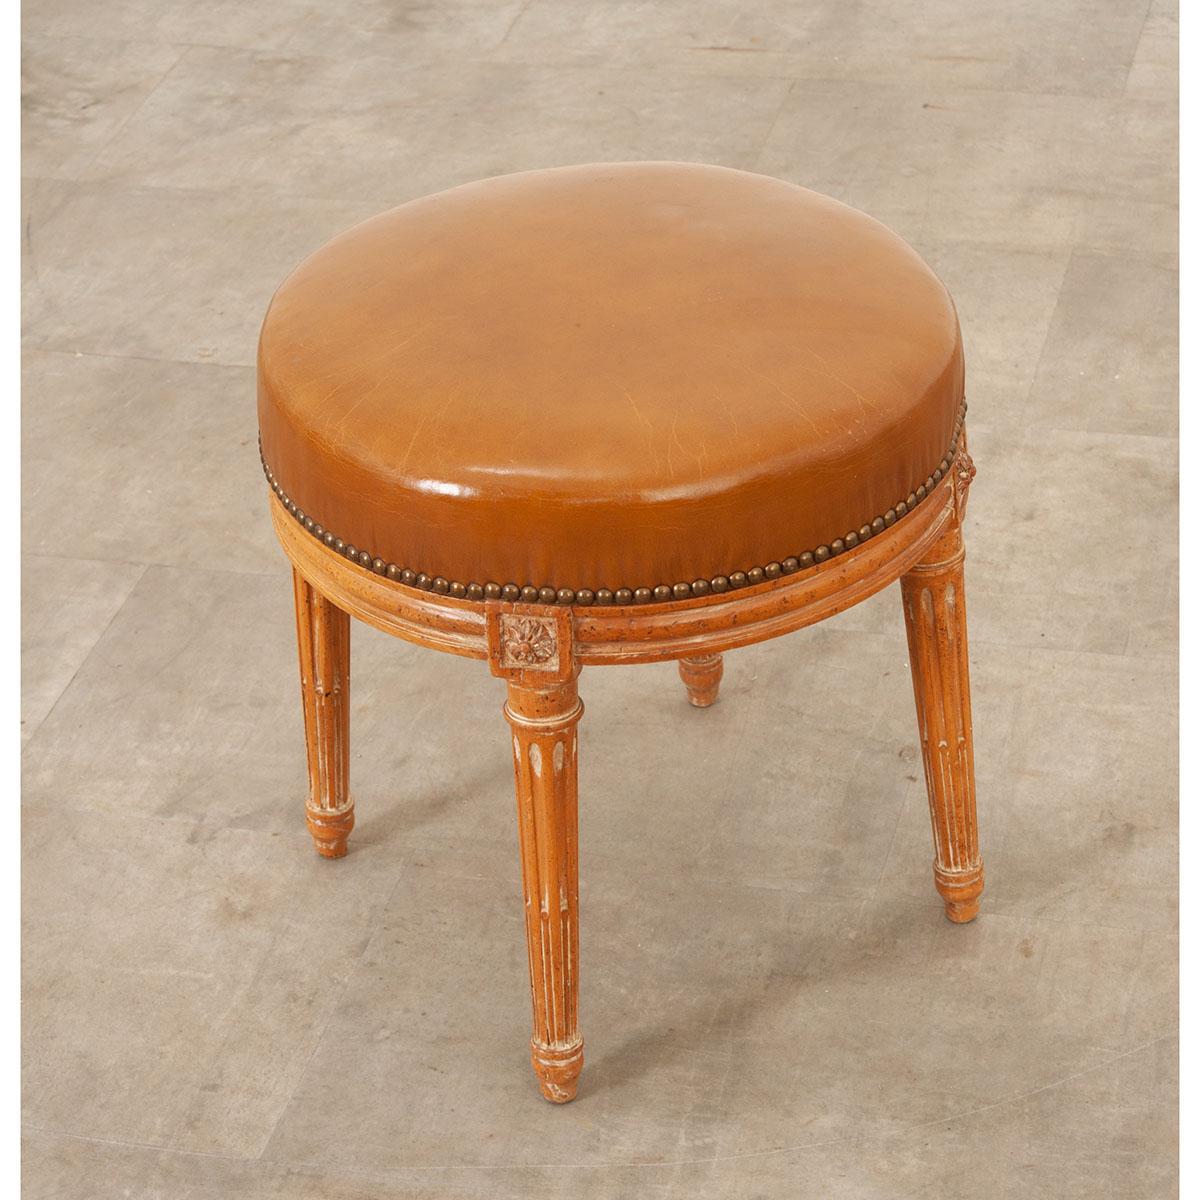 A beautiful vintage stool perfect for any space. Made in France, this 19th century stool has a brightly colored leather upholstered seat, atop four elegantly fluted and tapered legs with brass nailheads. There is a floral design carved into each